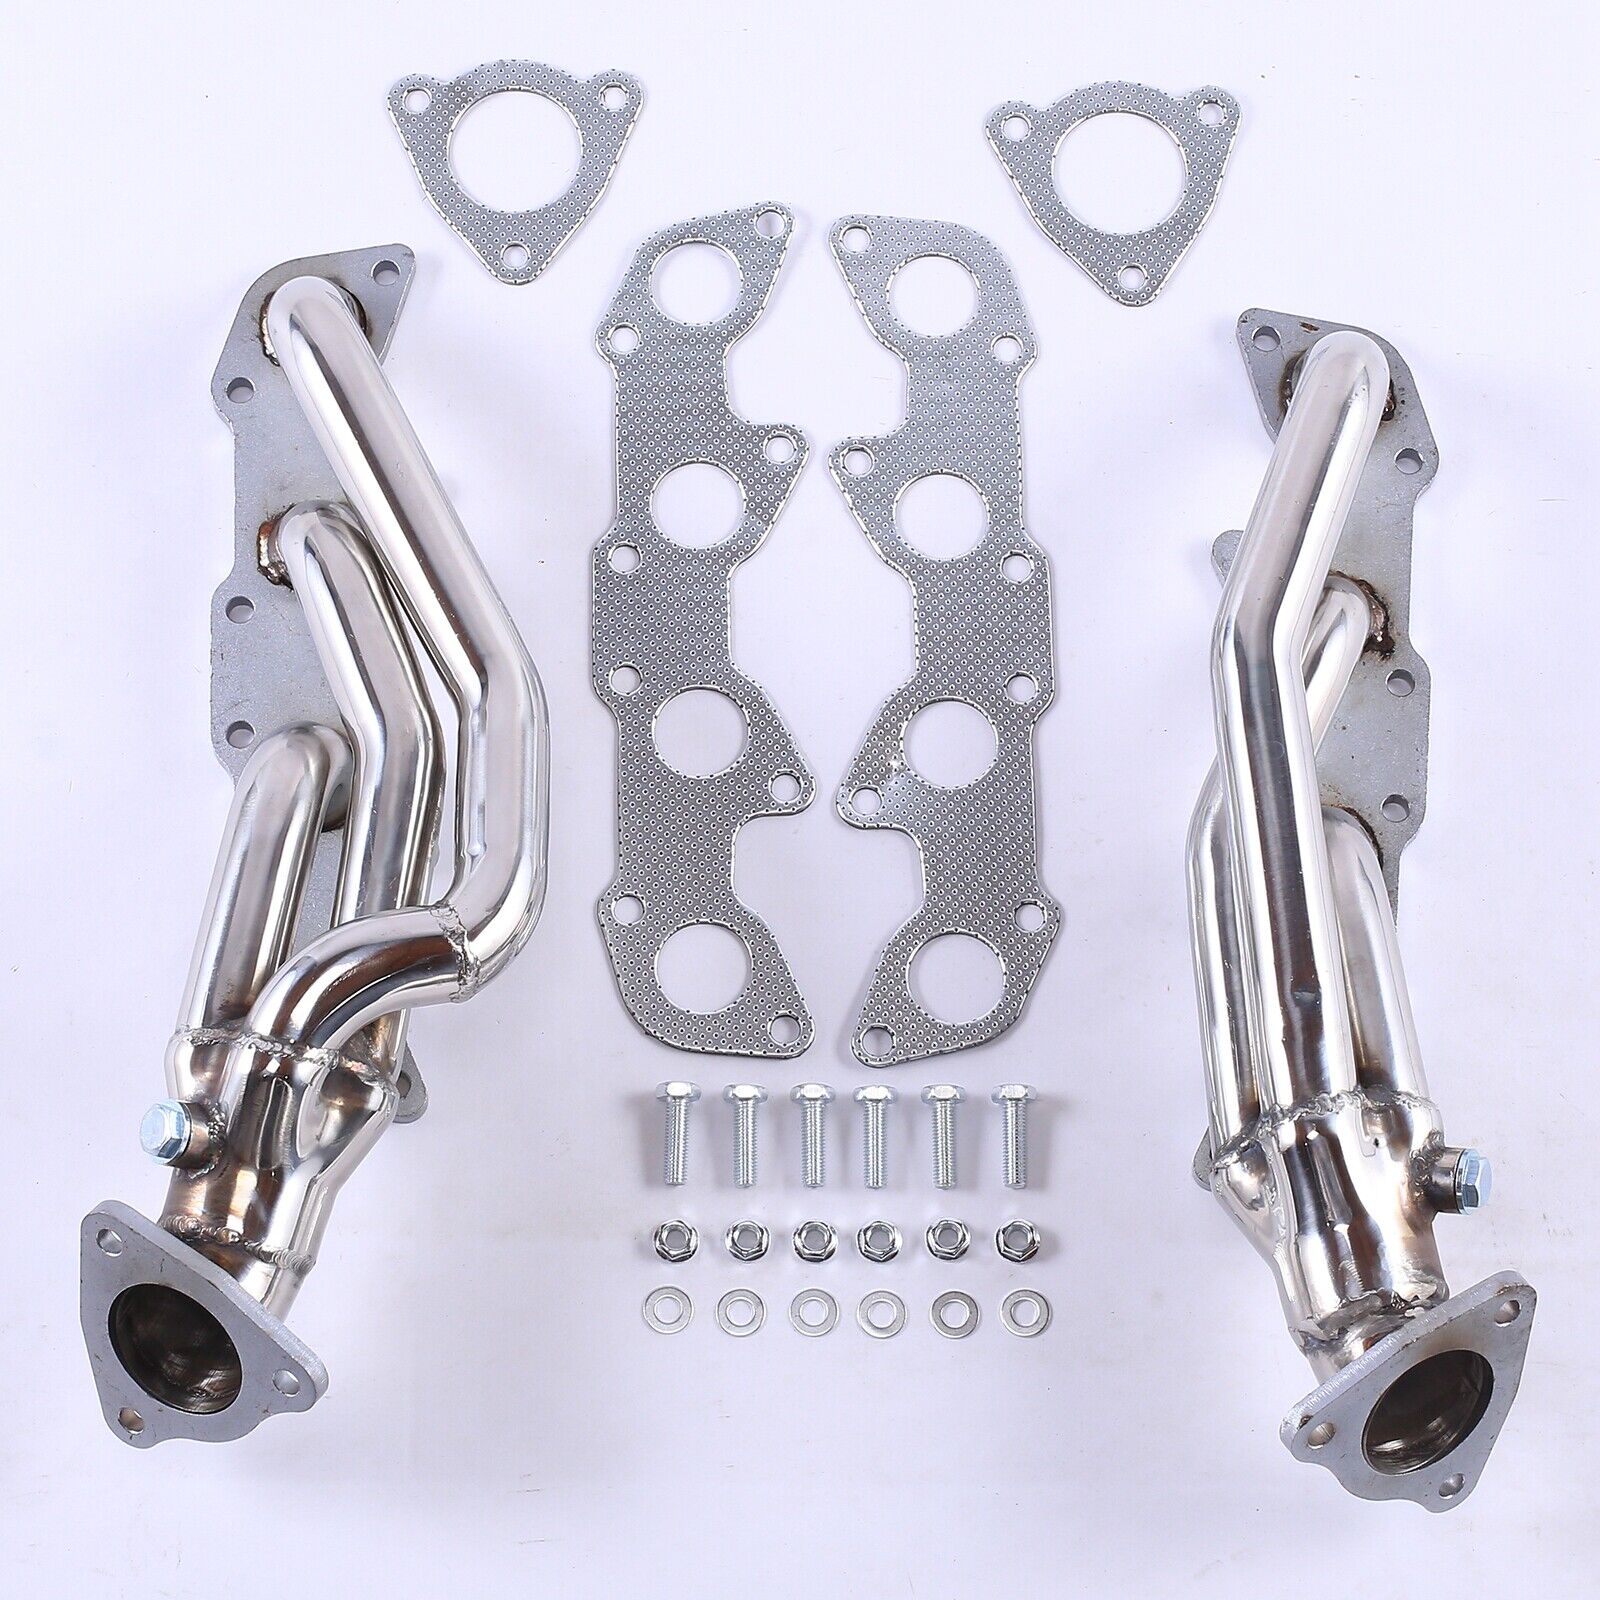 Stainless Steel Manifold Header For 2000-2004 Toyota Tundra 4.7L V8